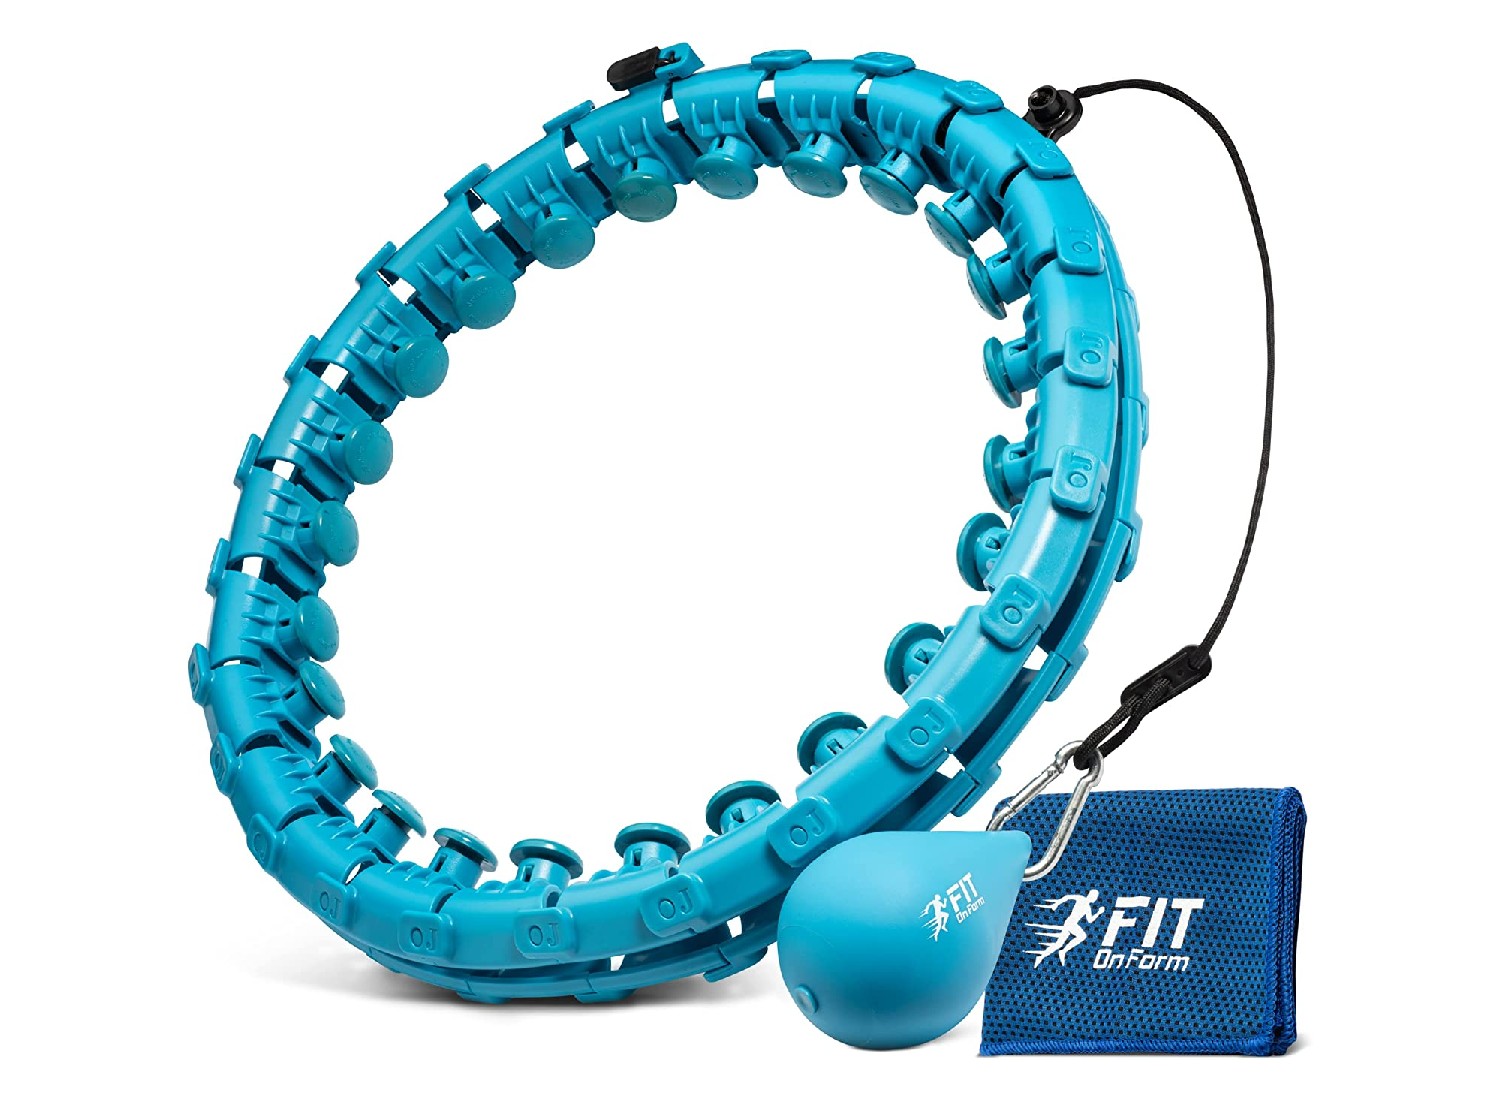 NEWBUFFER Smart Weighted Hula Hoop For Exercise，Hula Hoops For Adults Weight Loss Fitness，25 Detachable Knots Adjustable，Non-Falling Auto-Spinning Fitness Hoop 